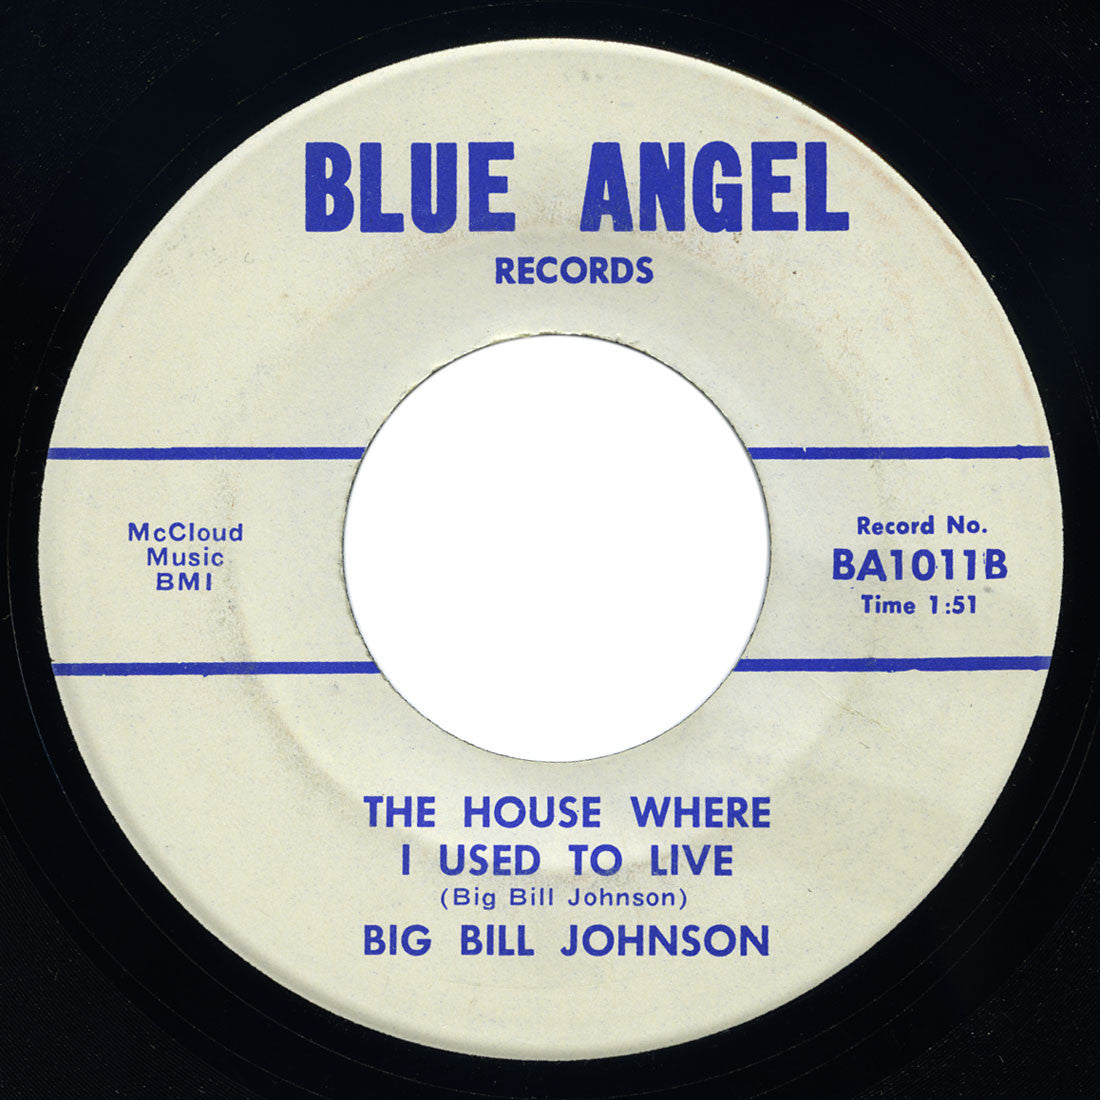 Big Bill Johnson - Jefferson County Jail / The House Where I Used To Live - Blue Angel